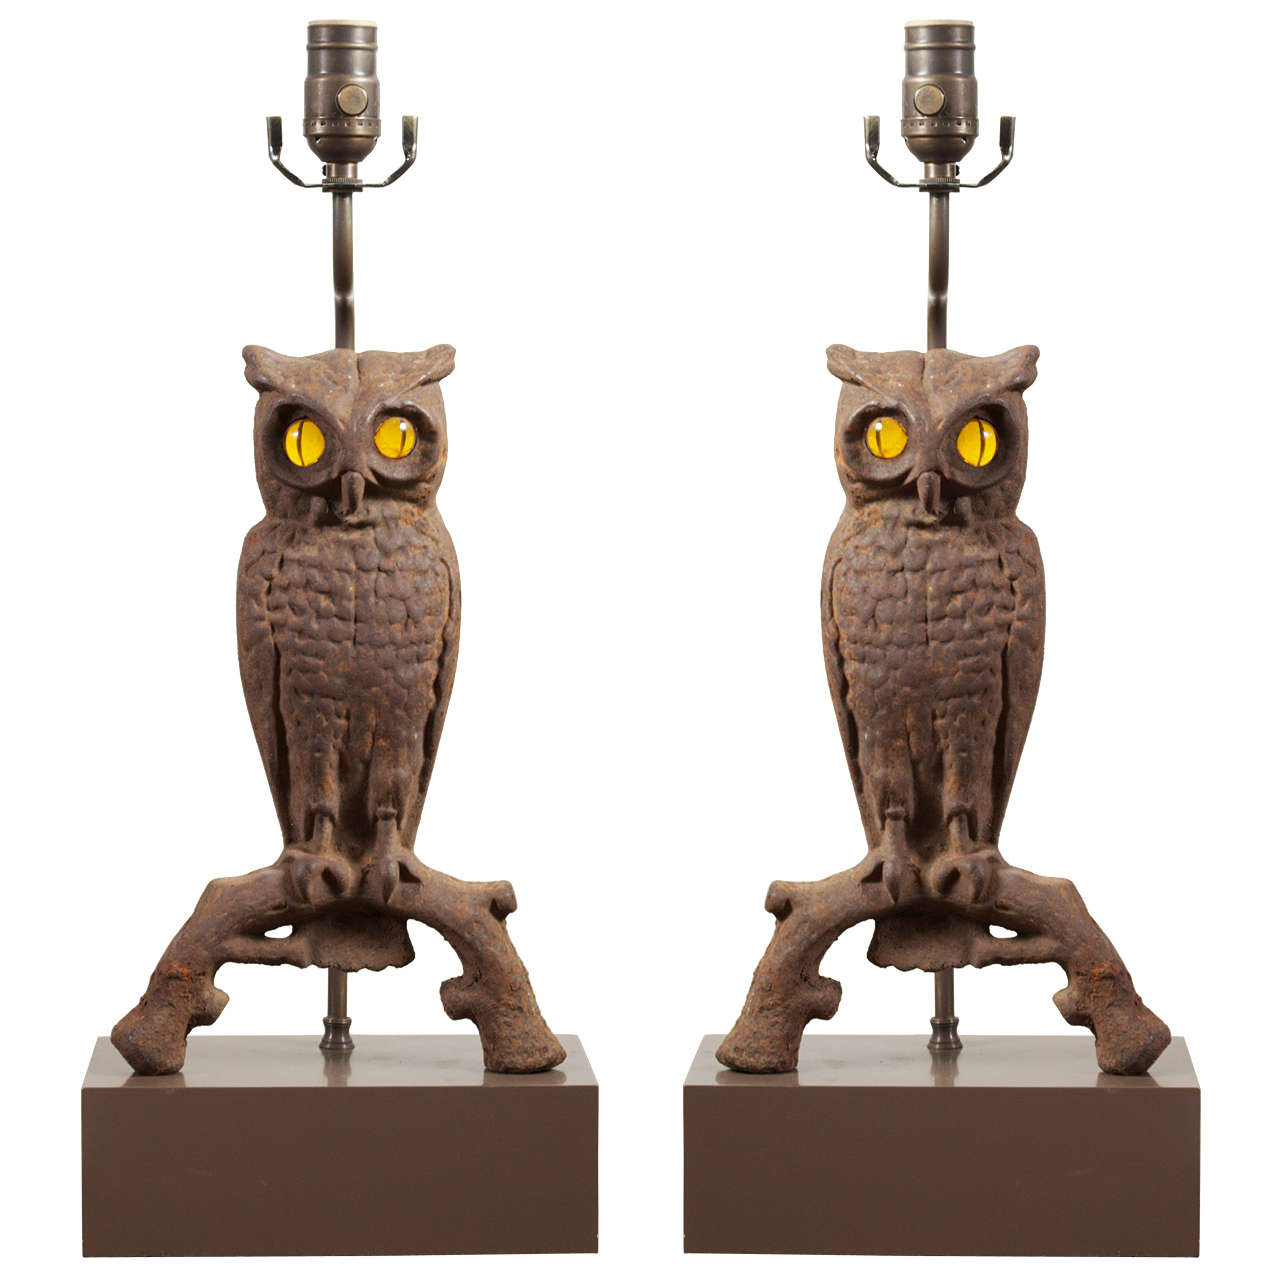 Pair of American Andirons Transformed to Lamps